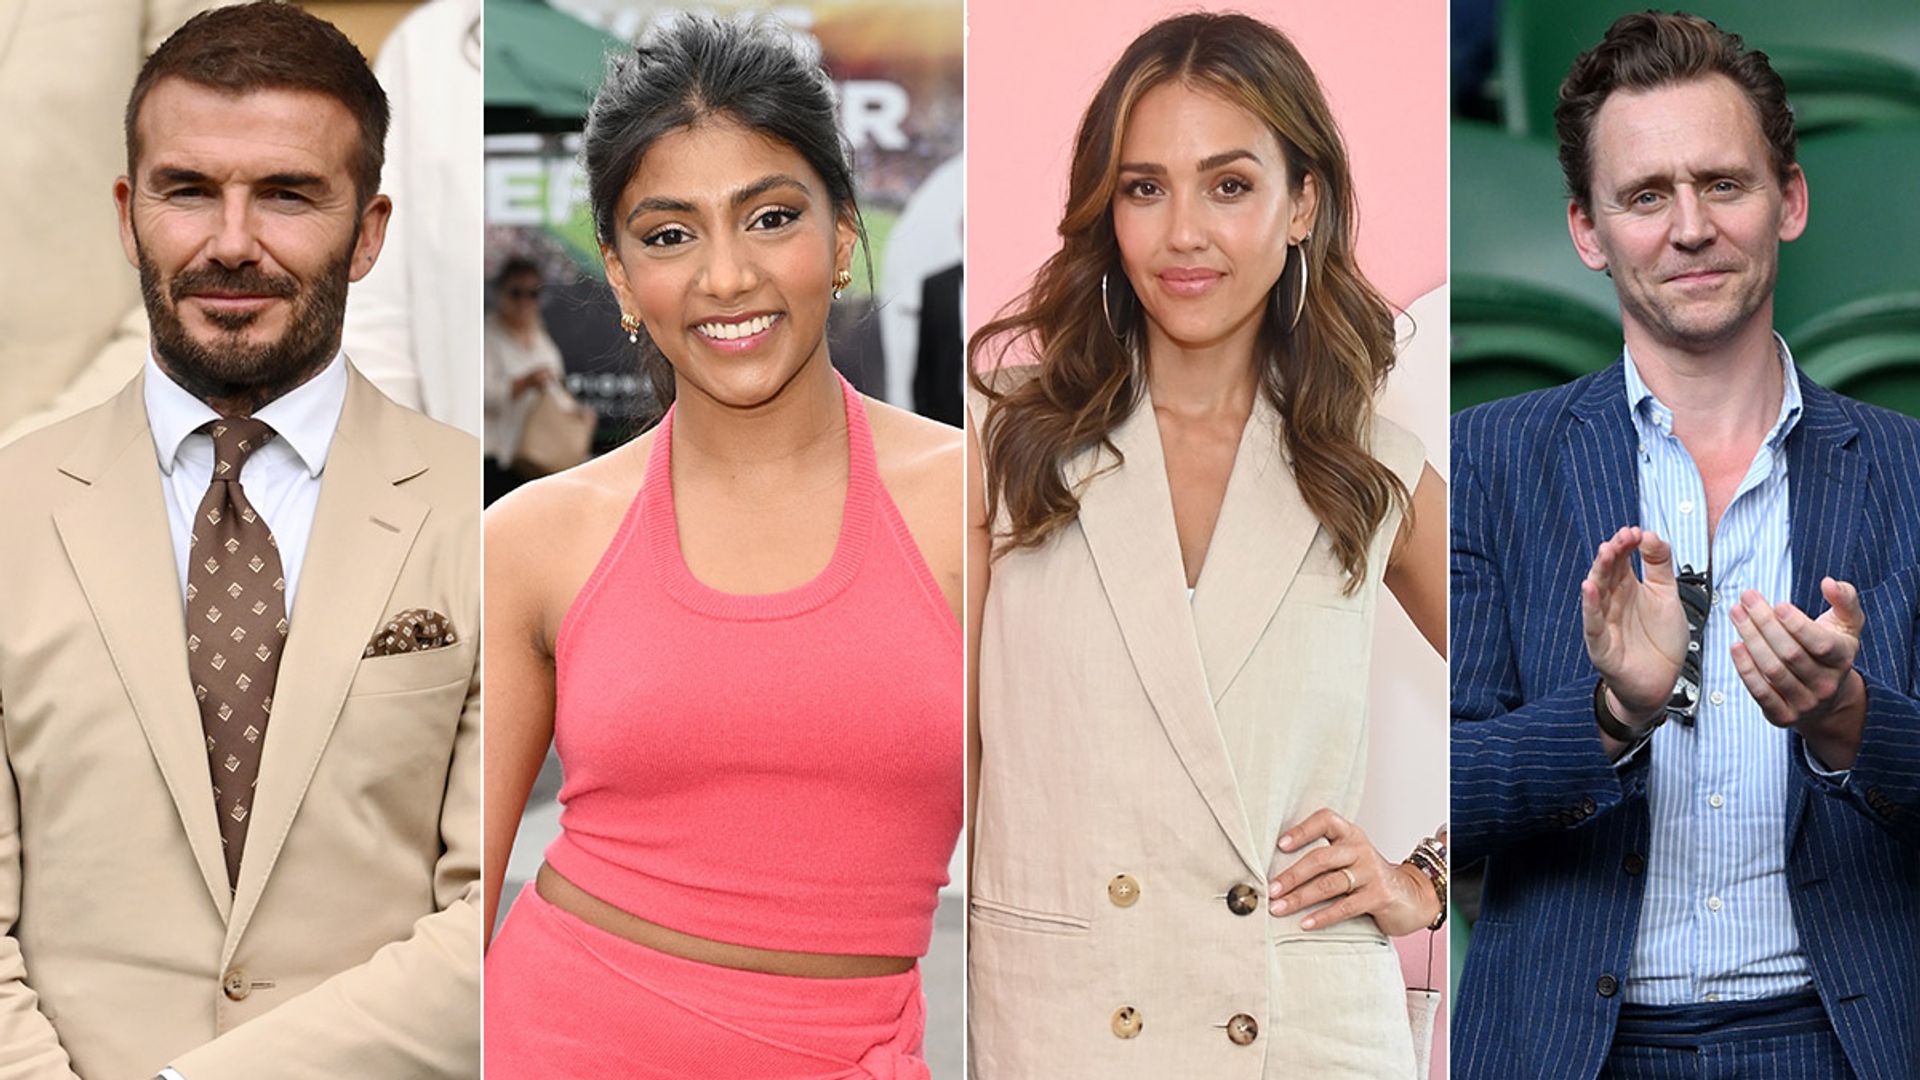 The Best Dressed Celebs At The Wimbledon Polo Ralph Lauren Suite